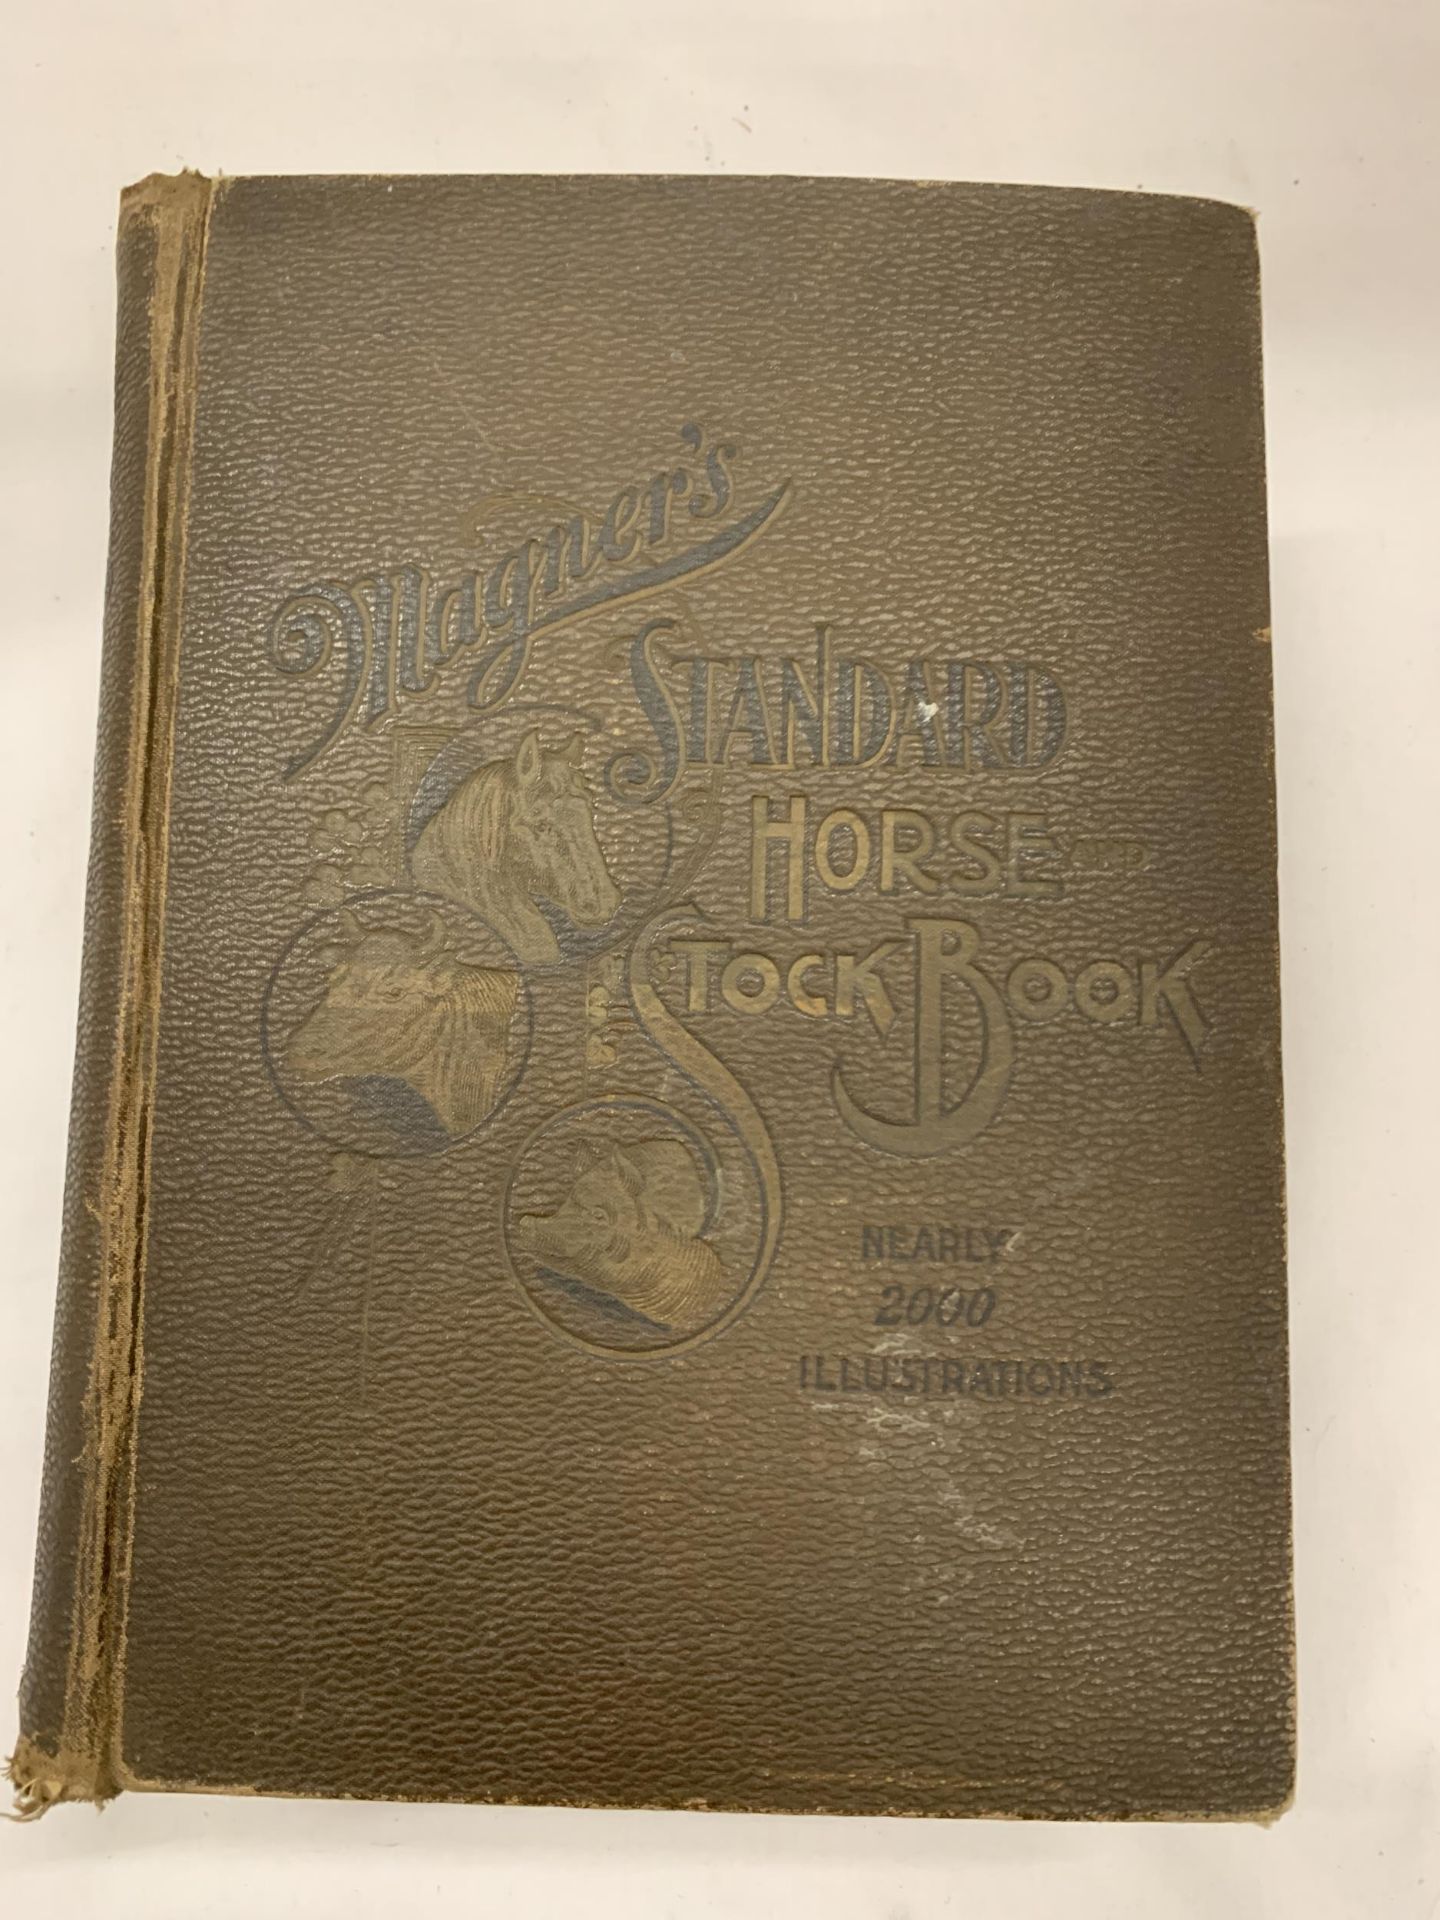 A 1906 MAGNER'S STANDARD HORSE AND STOCK BOOK - Image 2 of 8